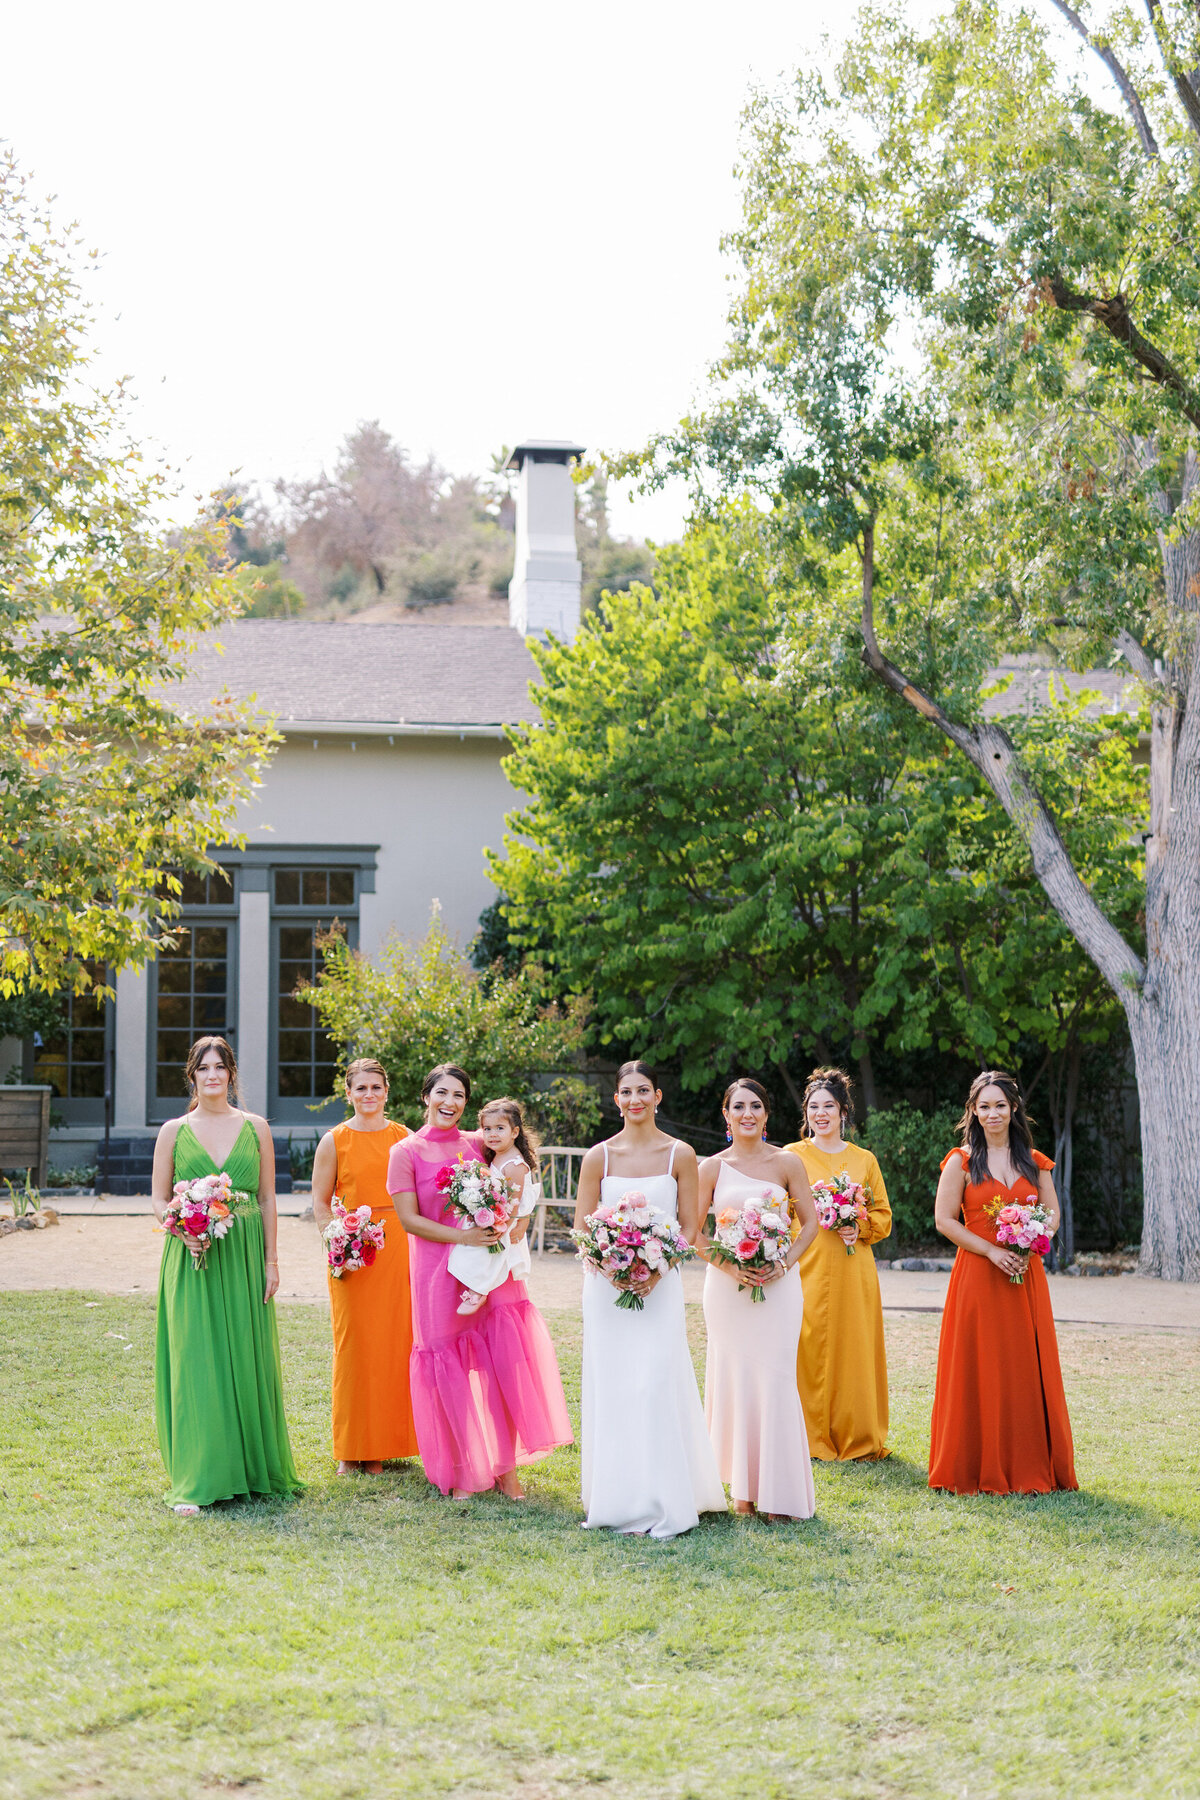 Angelica Marie Photography_Natalie Pirzad and Gordon Stewart Wedding_September 2022_The Lodge at Malibou Lake Wedding_Malibu Wedding Photographer_728